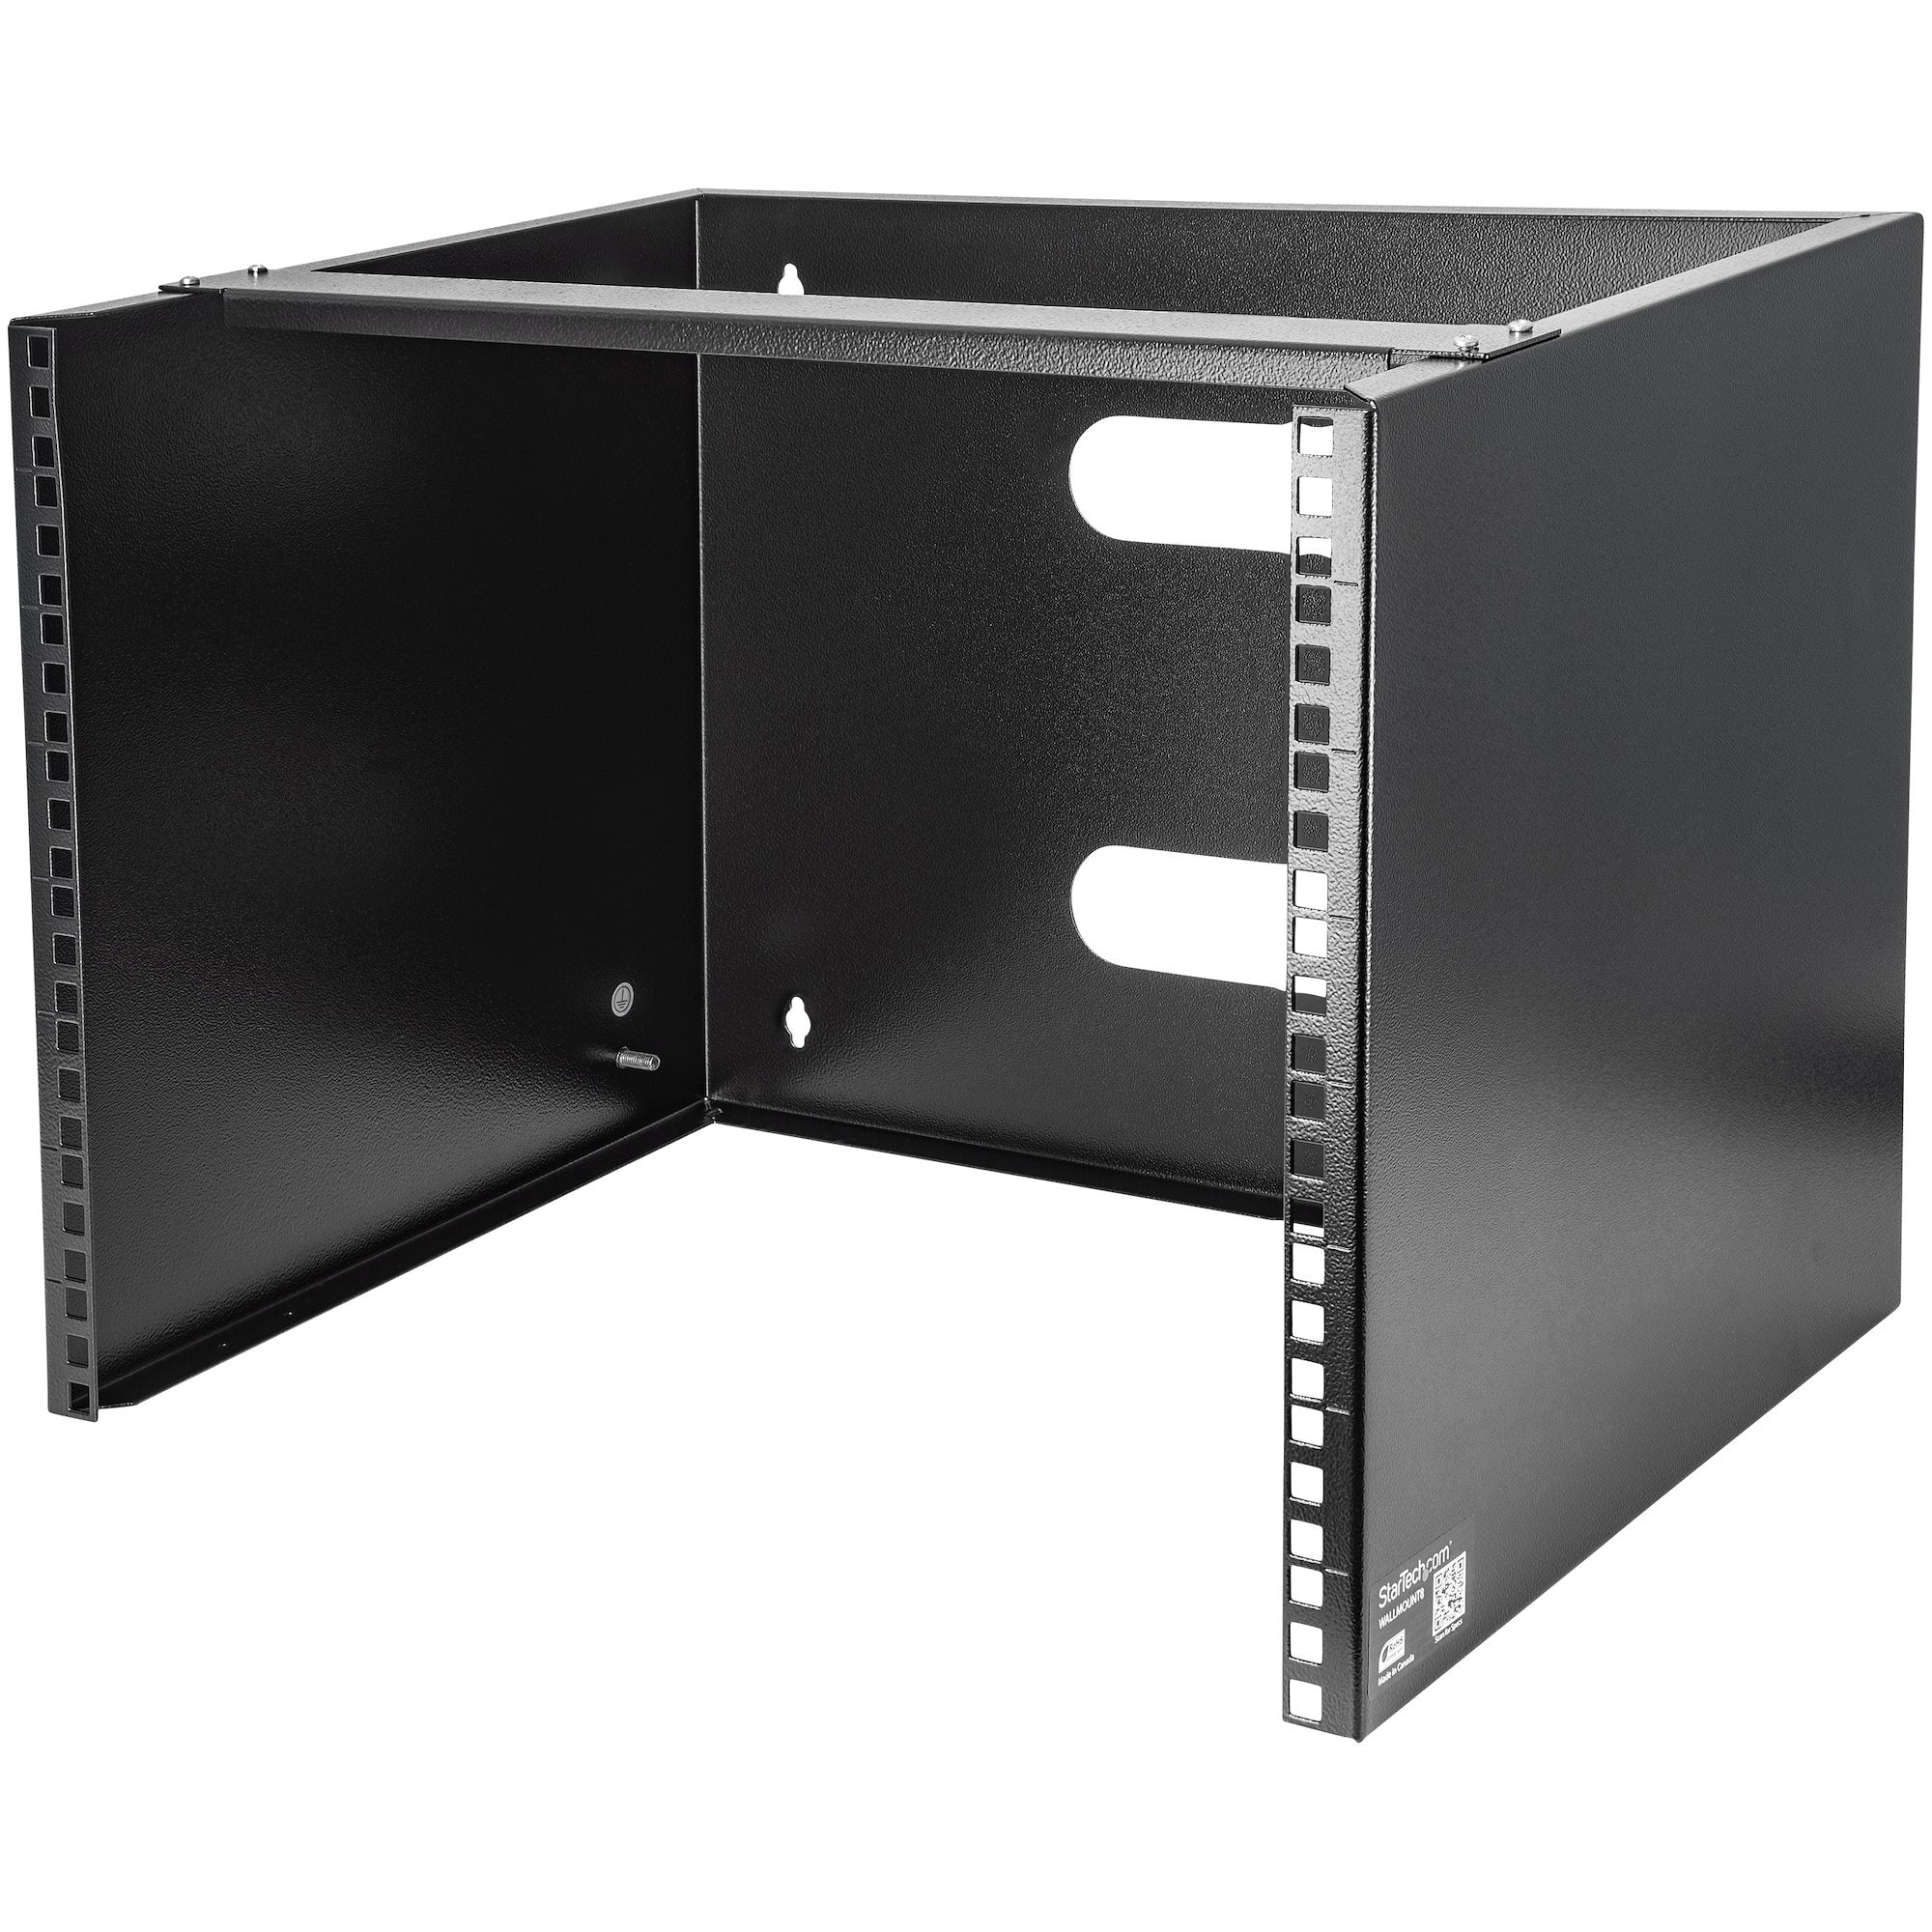 8U Wall Mount Network Rack - 14 Inch Deep (Low Profile) - 19" Patch Panel Bracket for Shallow Server and IT Equipment